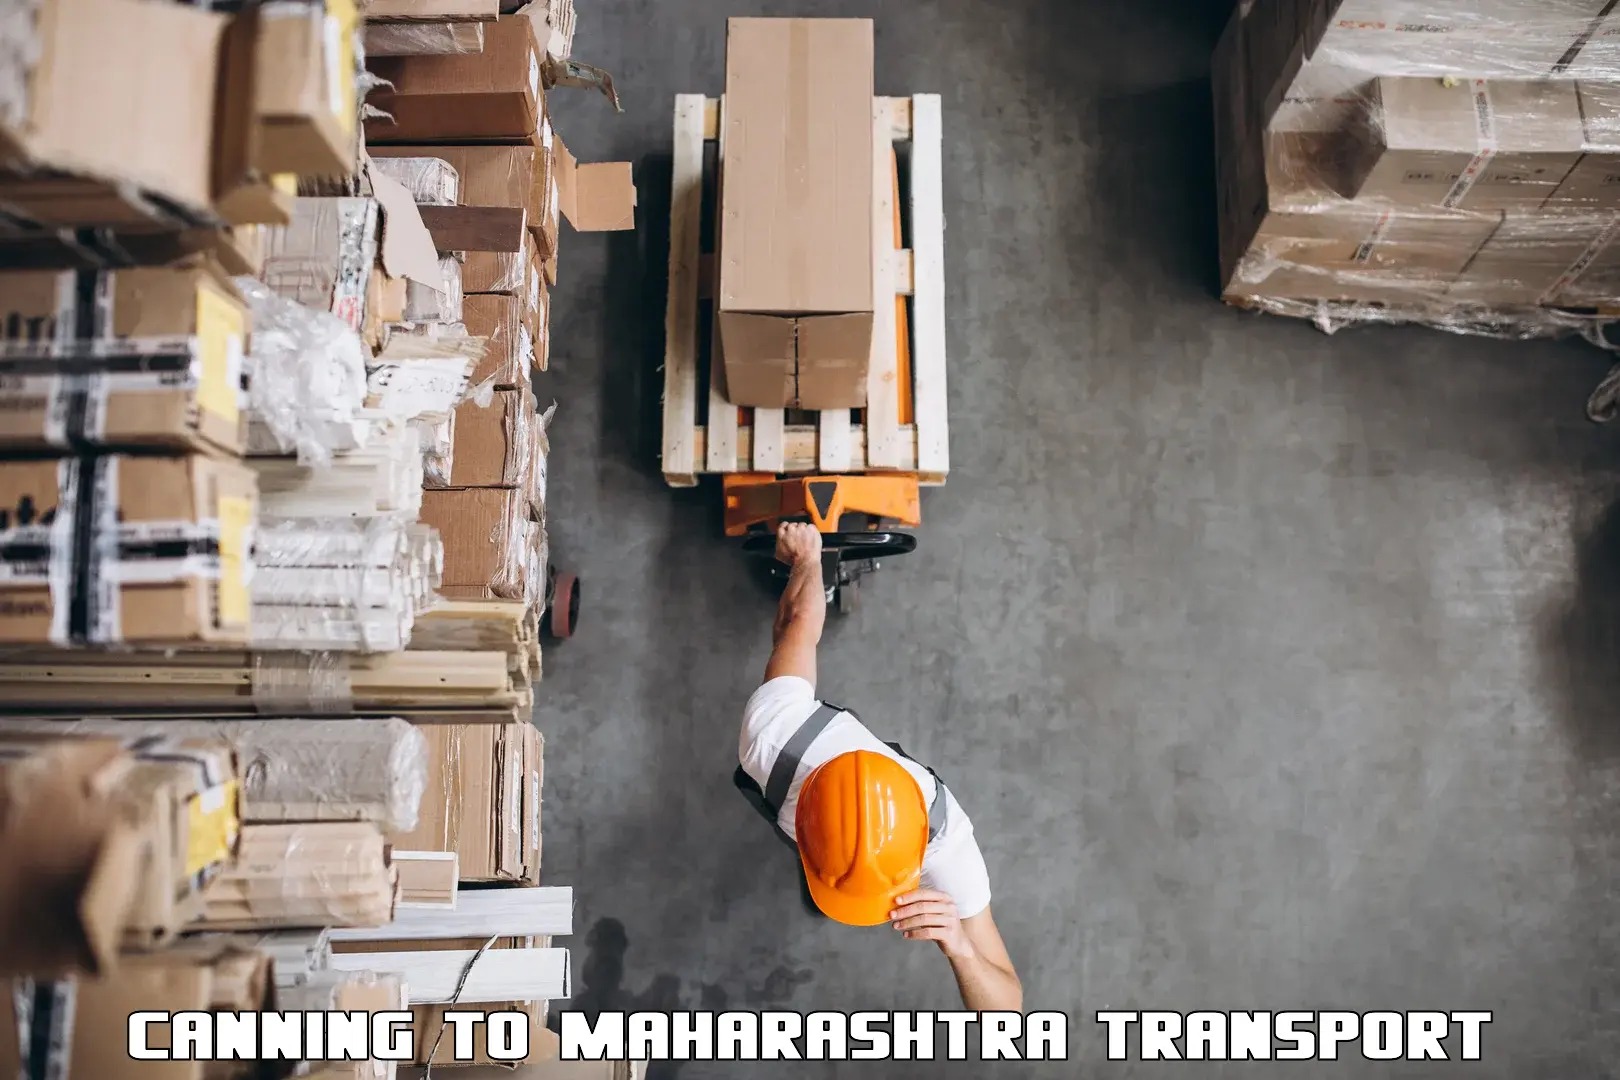 Road transport services in Canning to Maharashtra